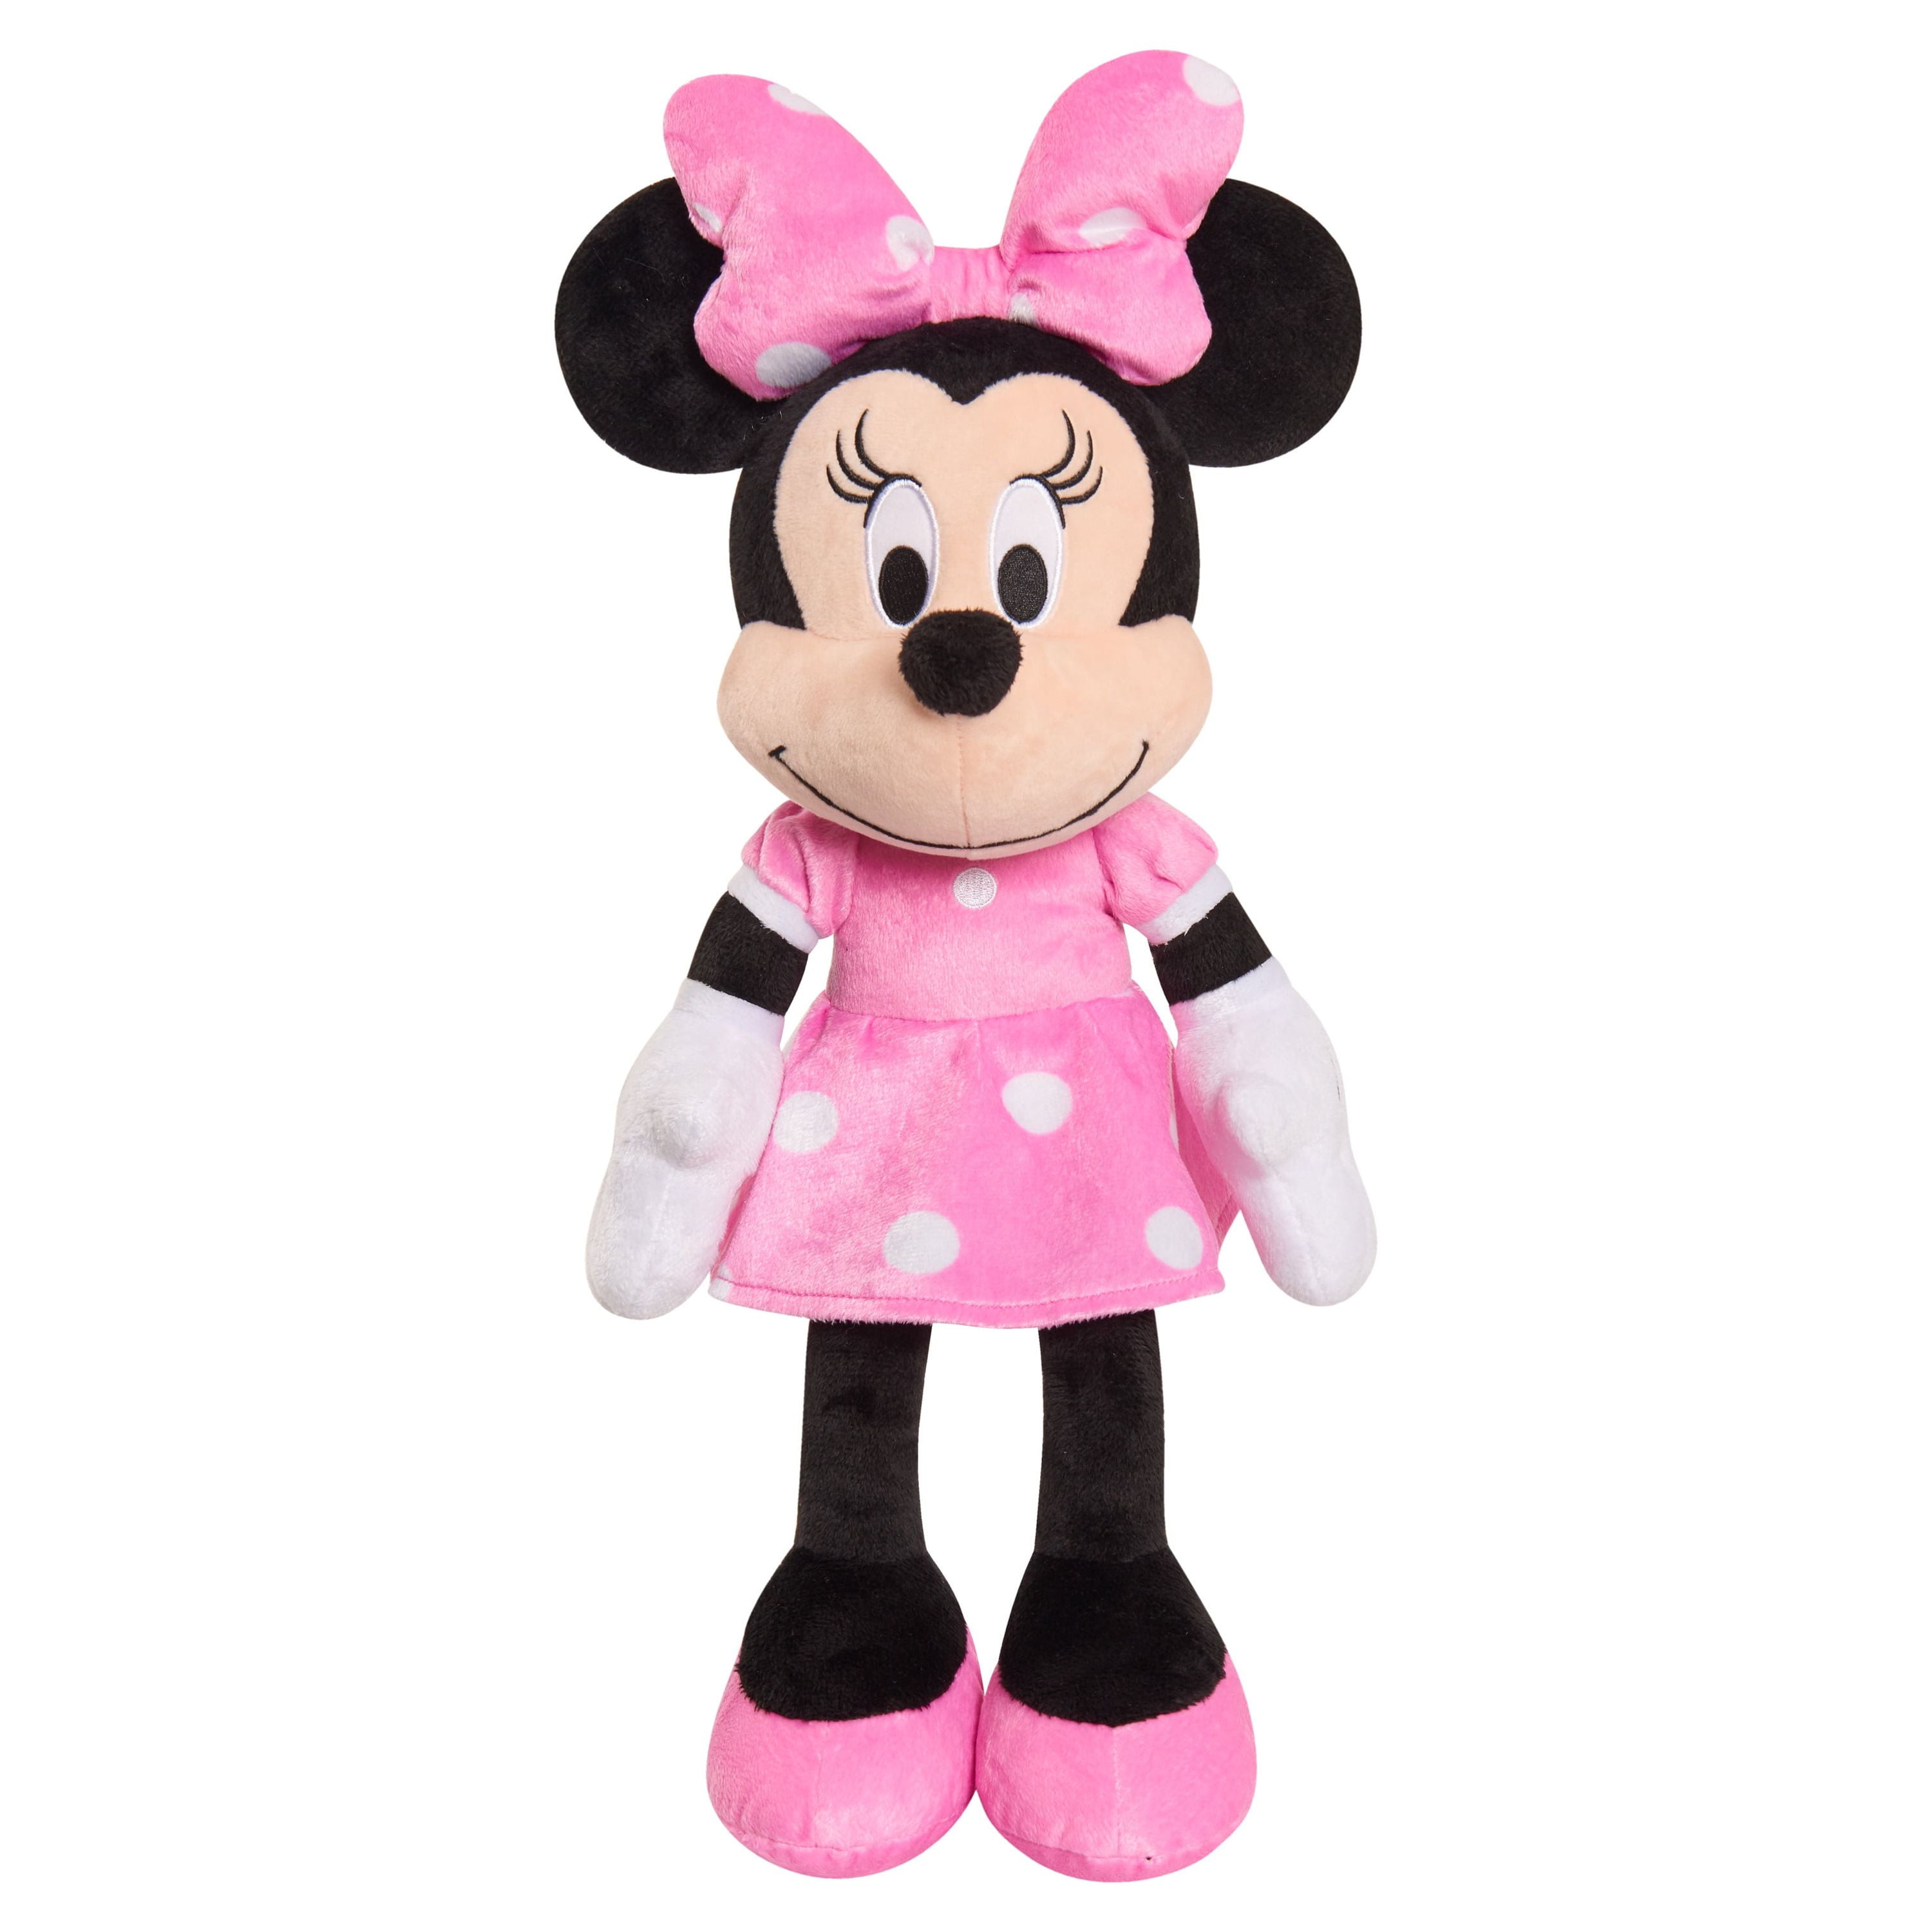 Disney Junior Minnie Mouse Polka Dot Pets Collectible Figures, Kids Toys for Ages 3 Up, Size: 3.07 inches; 2.16 inches; 3.0 Inches